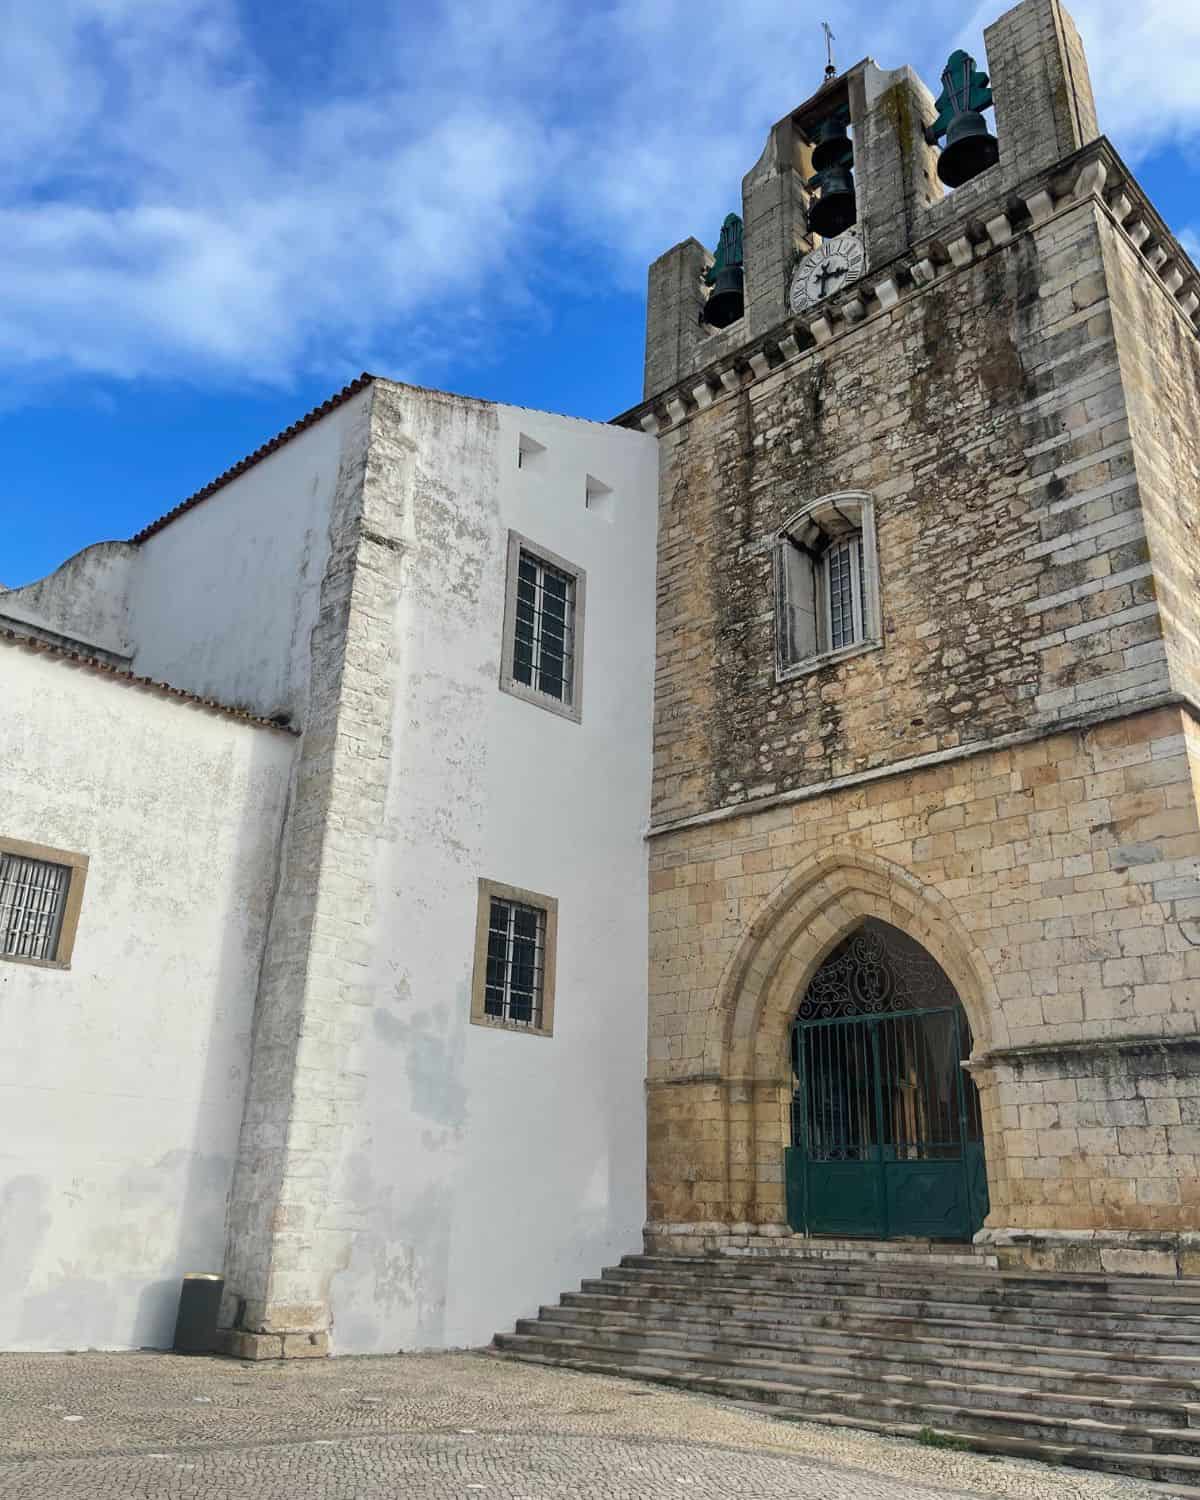 The exterior of the Faro cathedral